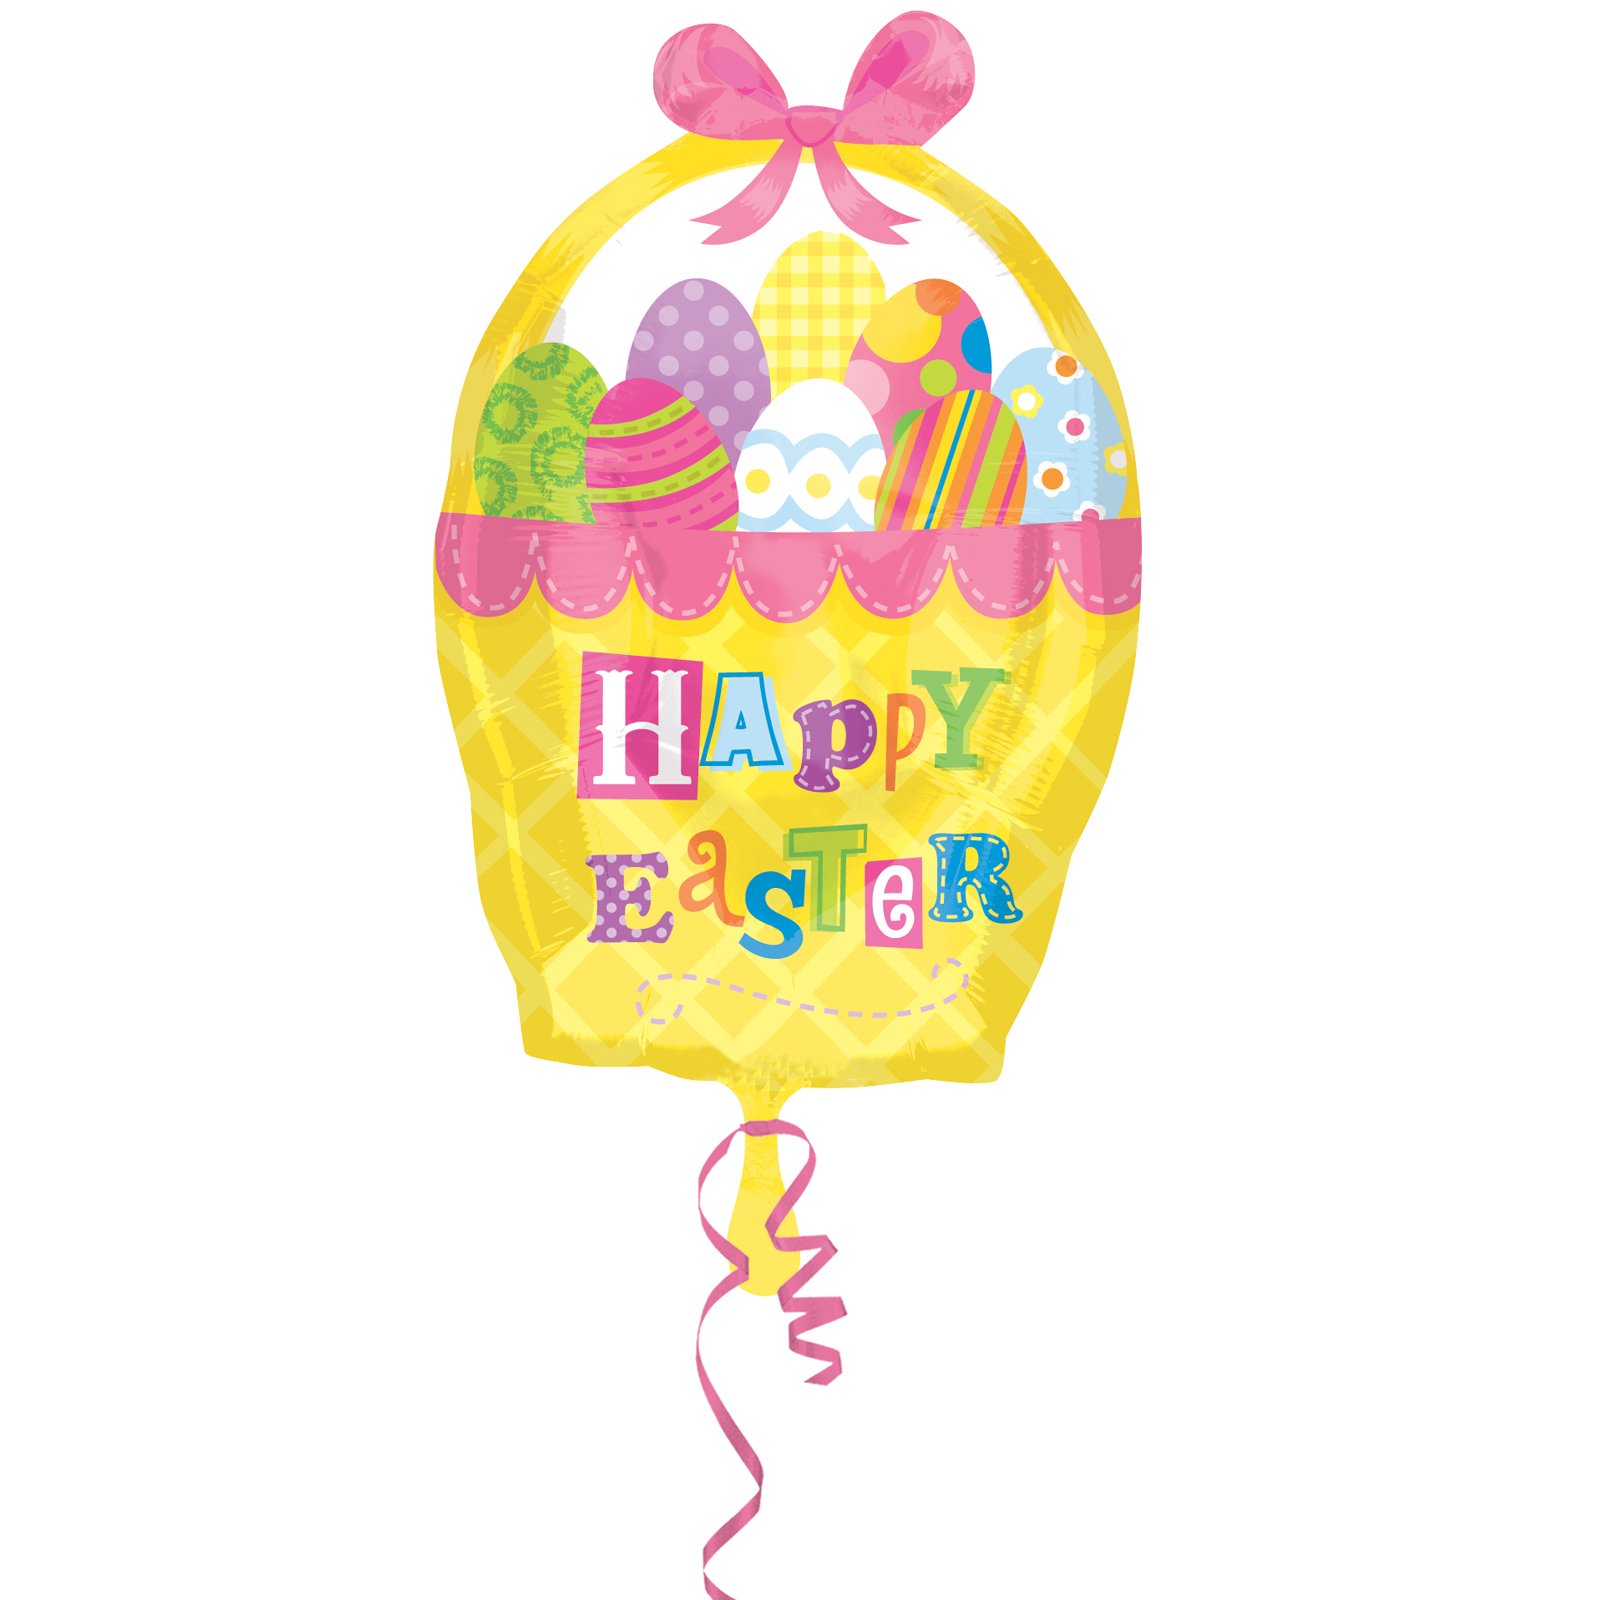 Easter Birthday Party Ideas That Are Egg-